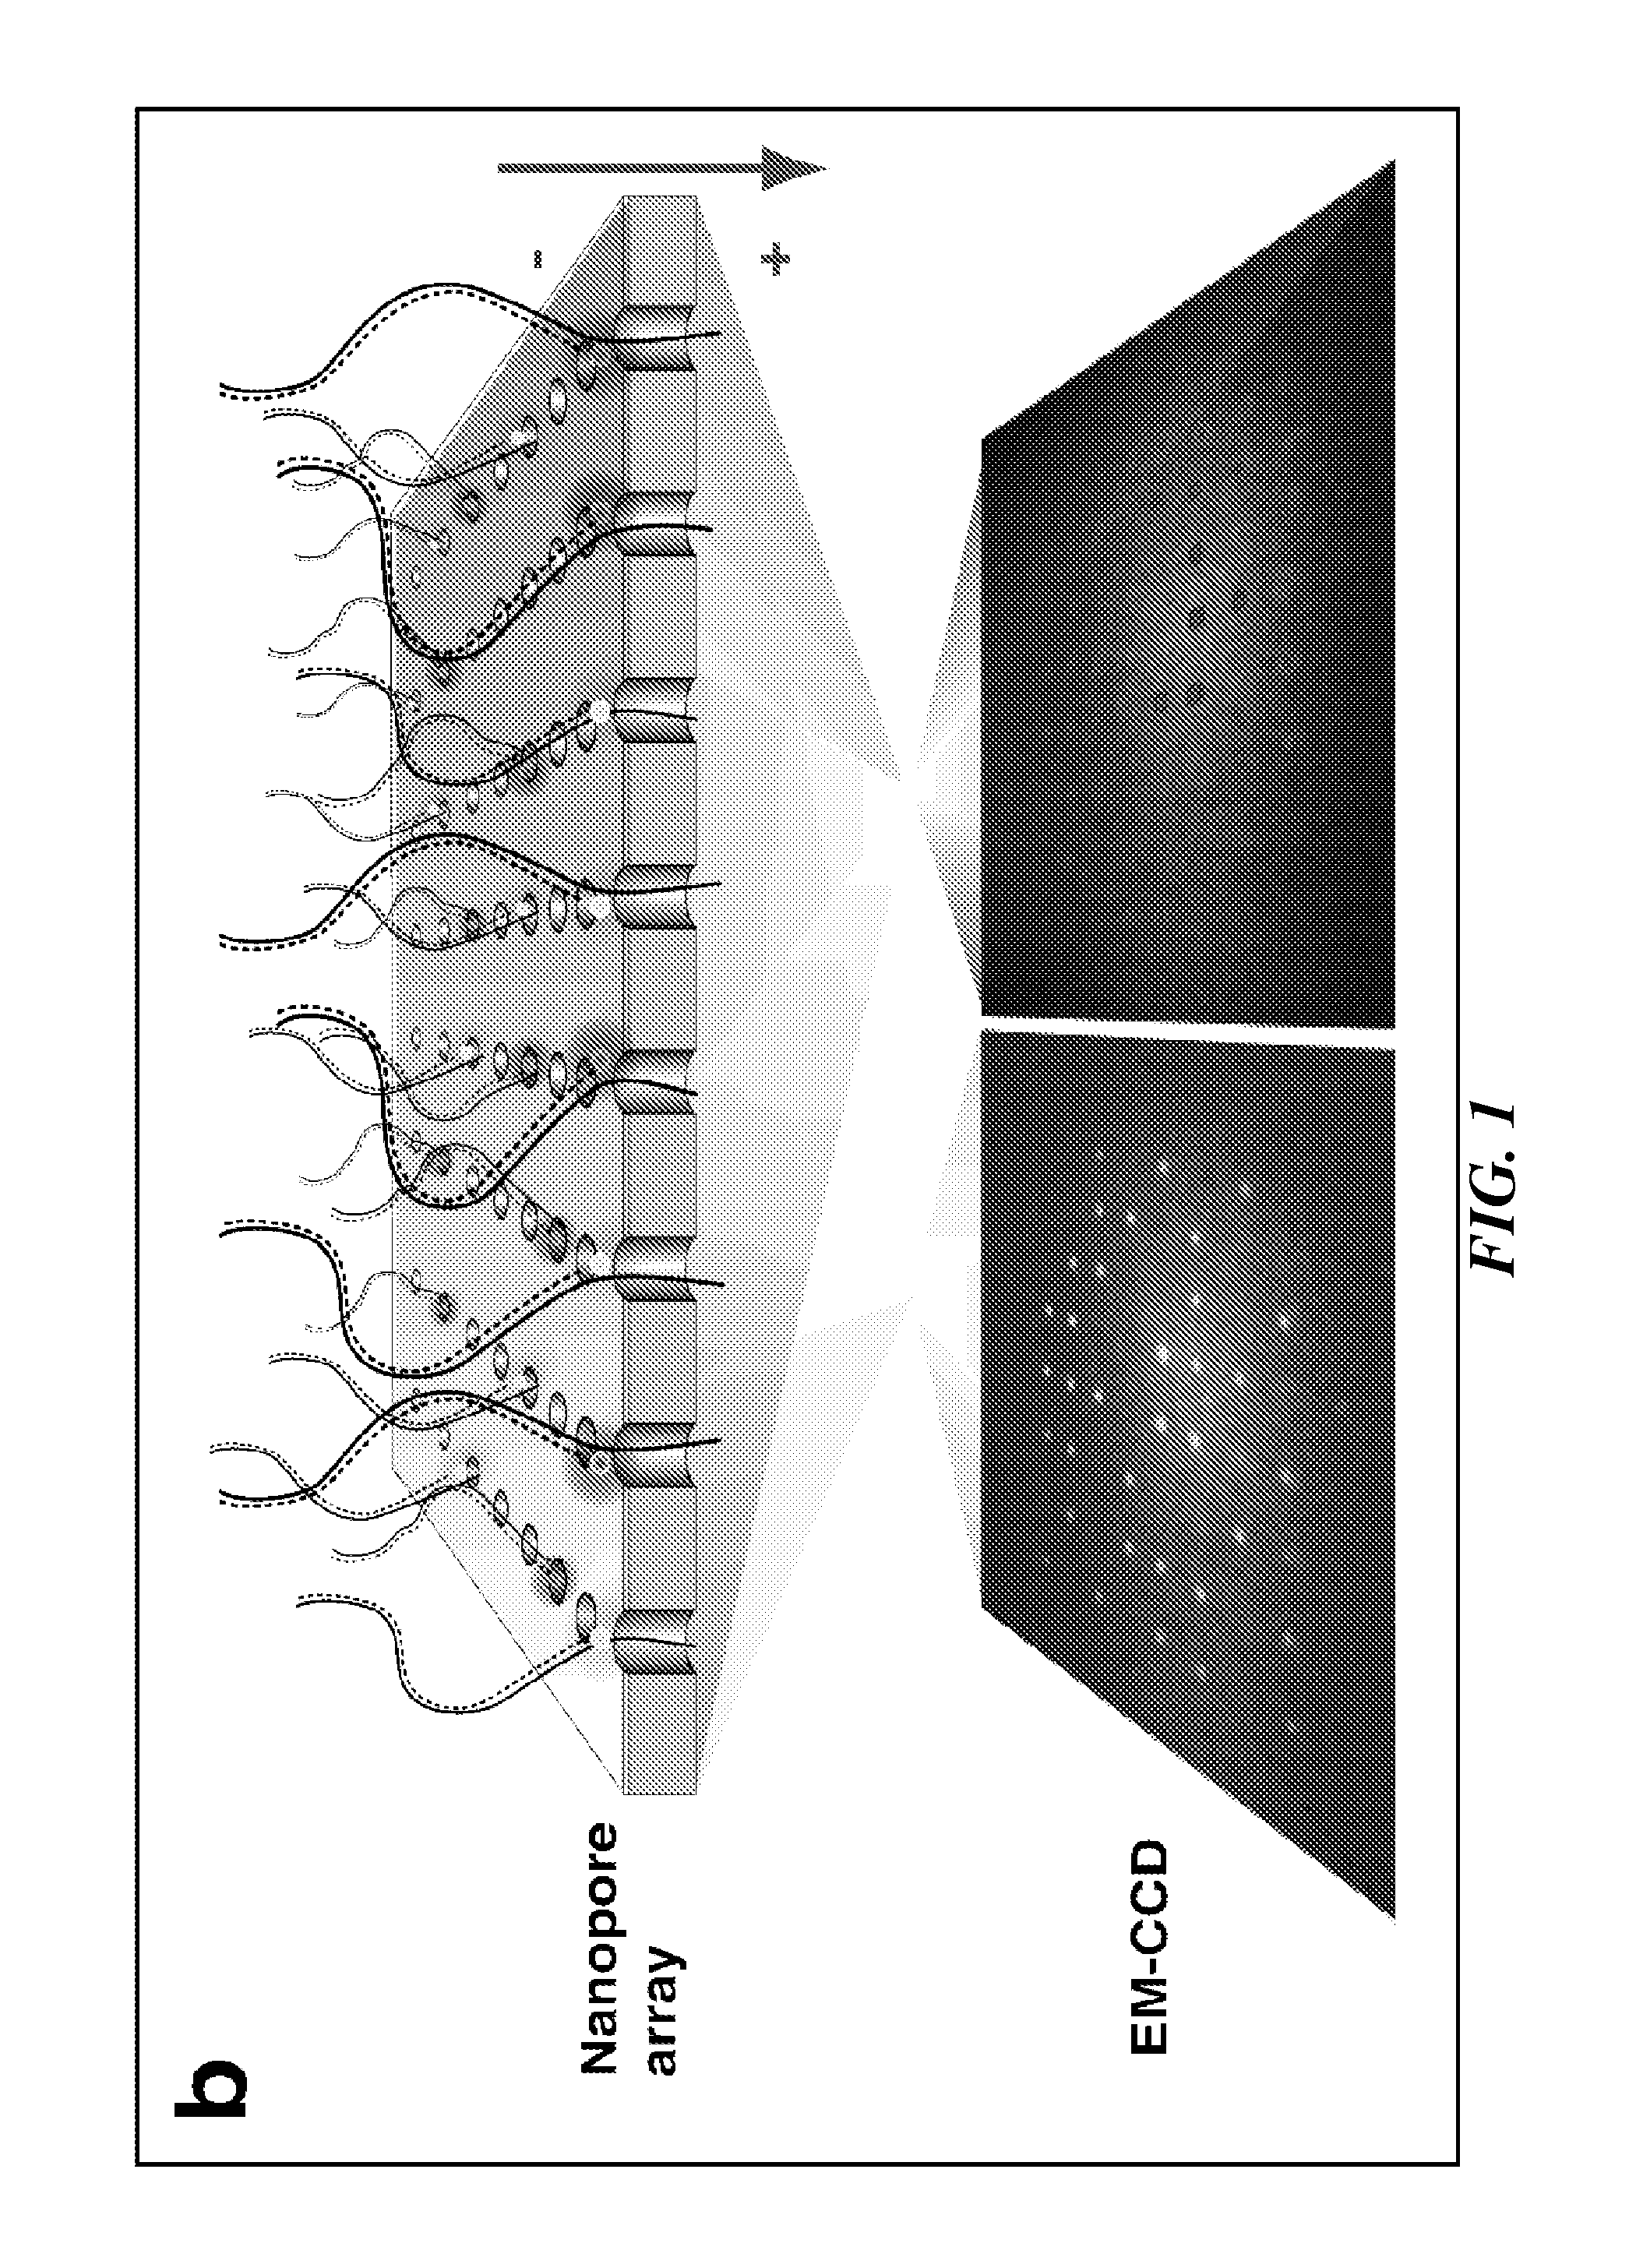 Tools and Method for Nanopores Unzipping-Dependent Nucleic Acid Sequencing